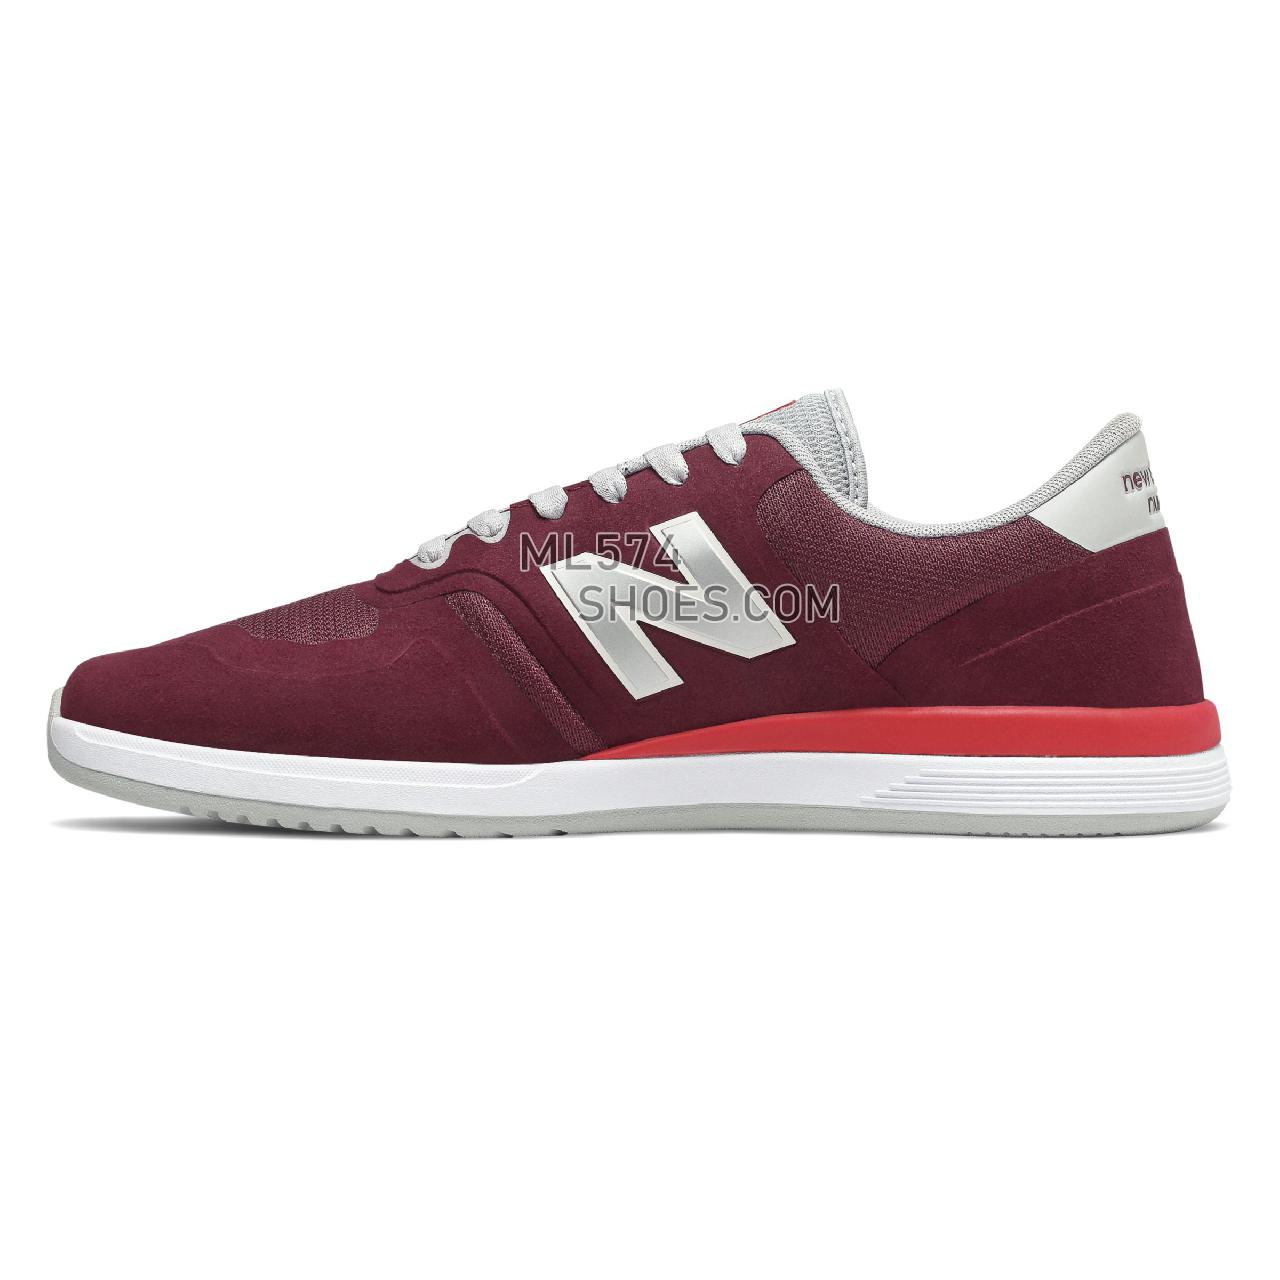 New Balance Numeric 420 - Men's NB Numeric Skate - Burgundy with Red - NM420BRD